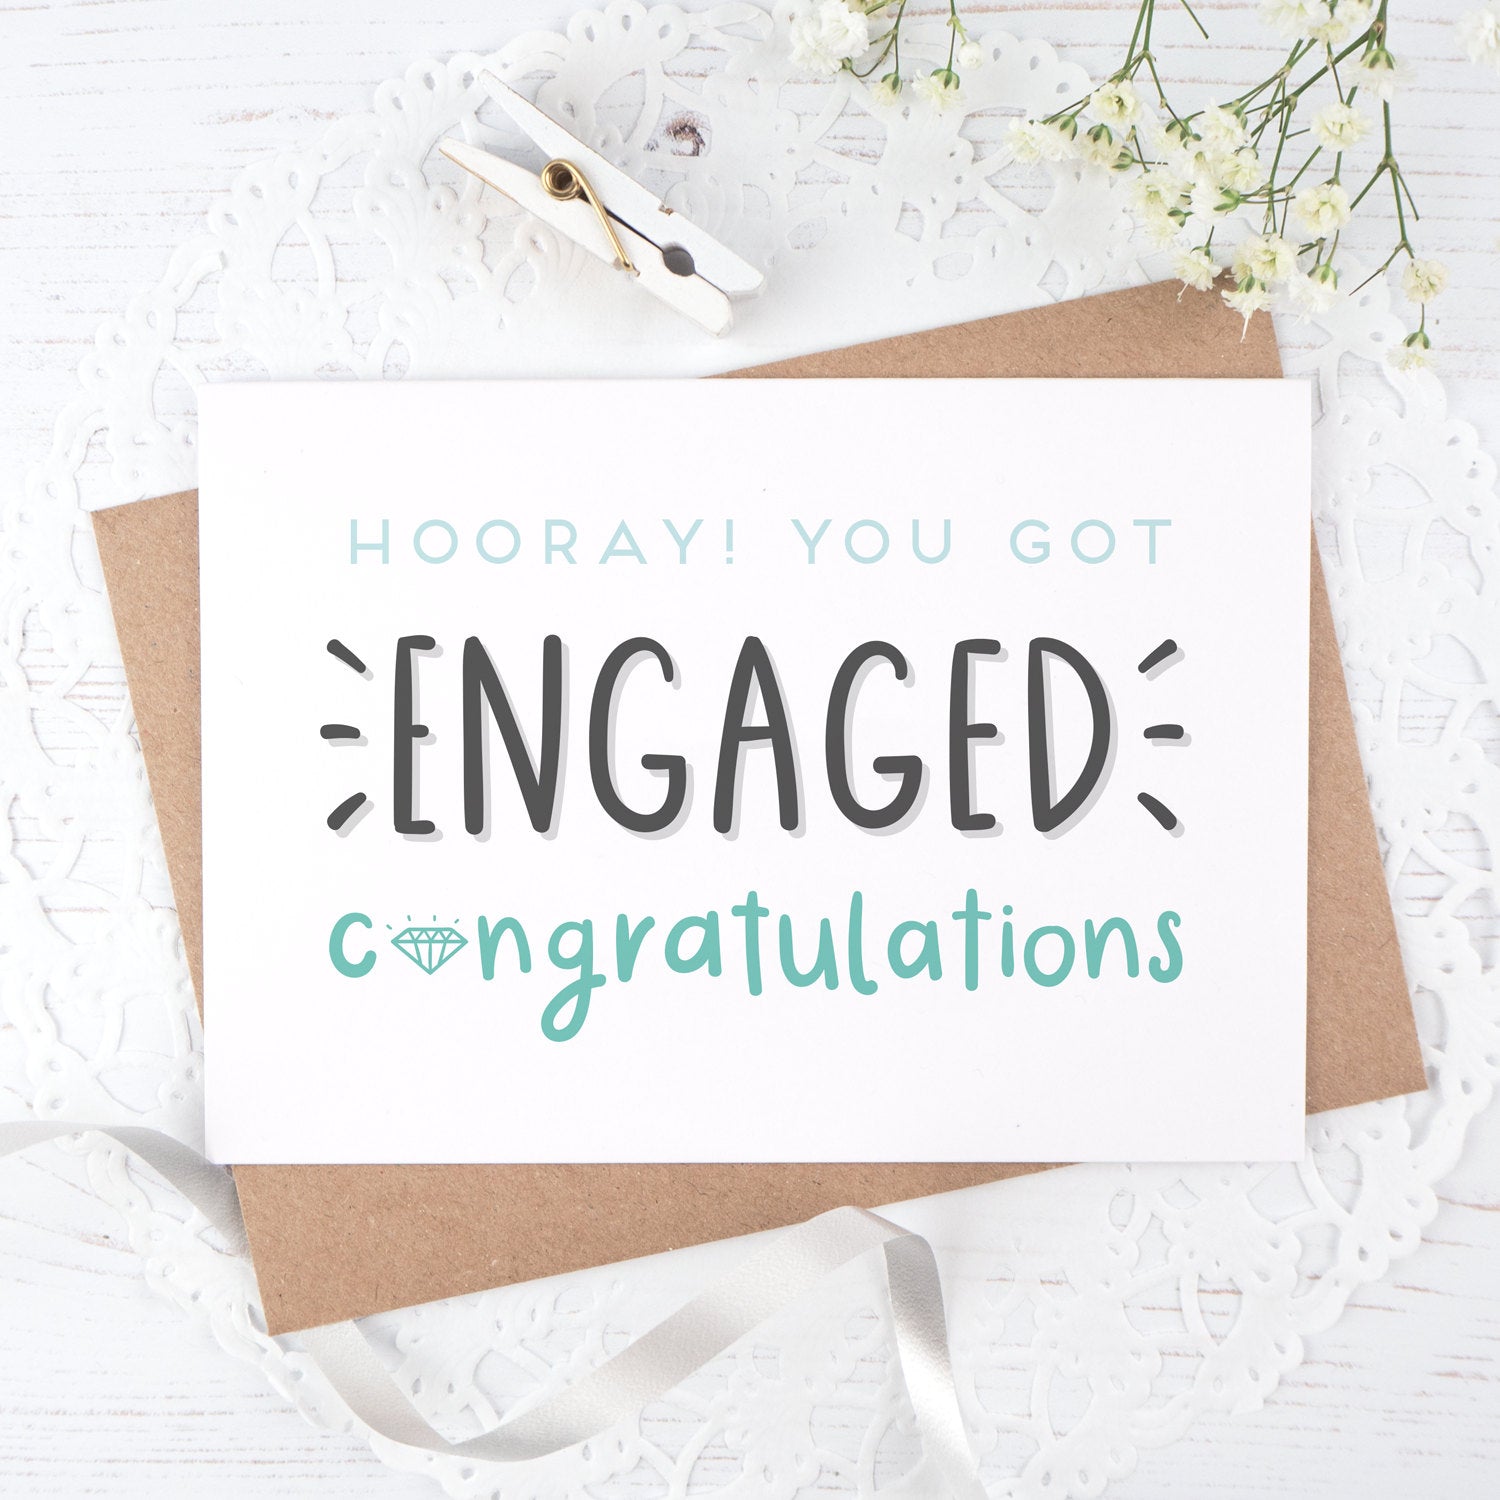 Engagement congratulations card in blue